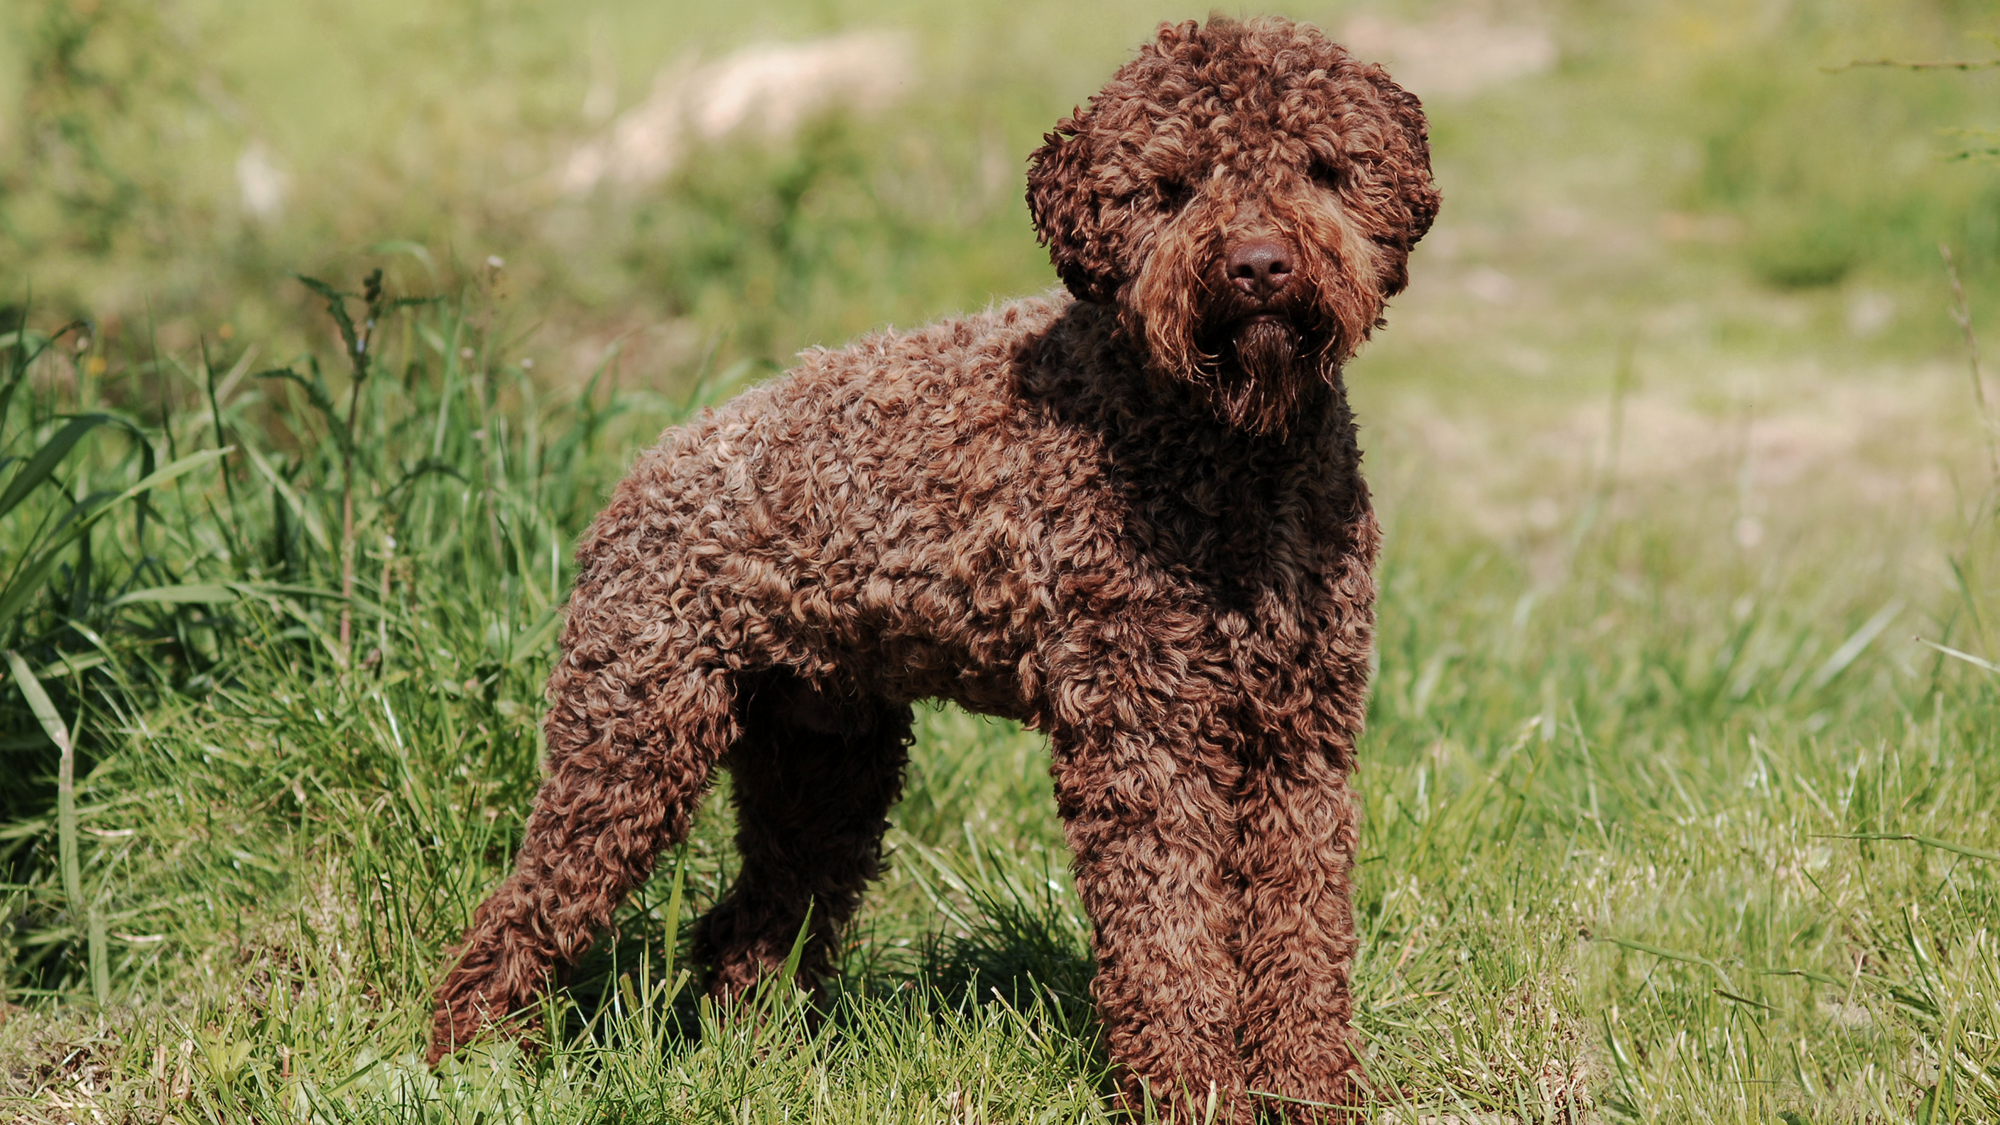 Brown Lagotto Romagnolo standing in grass looking at camera